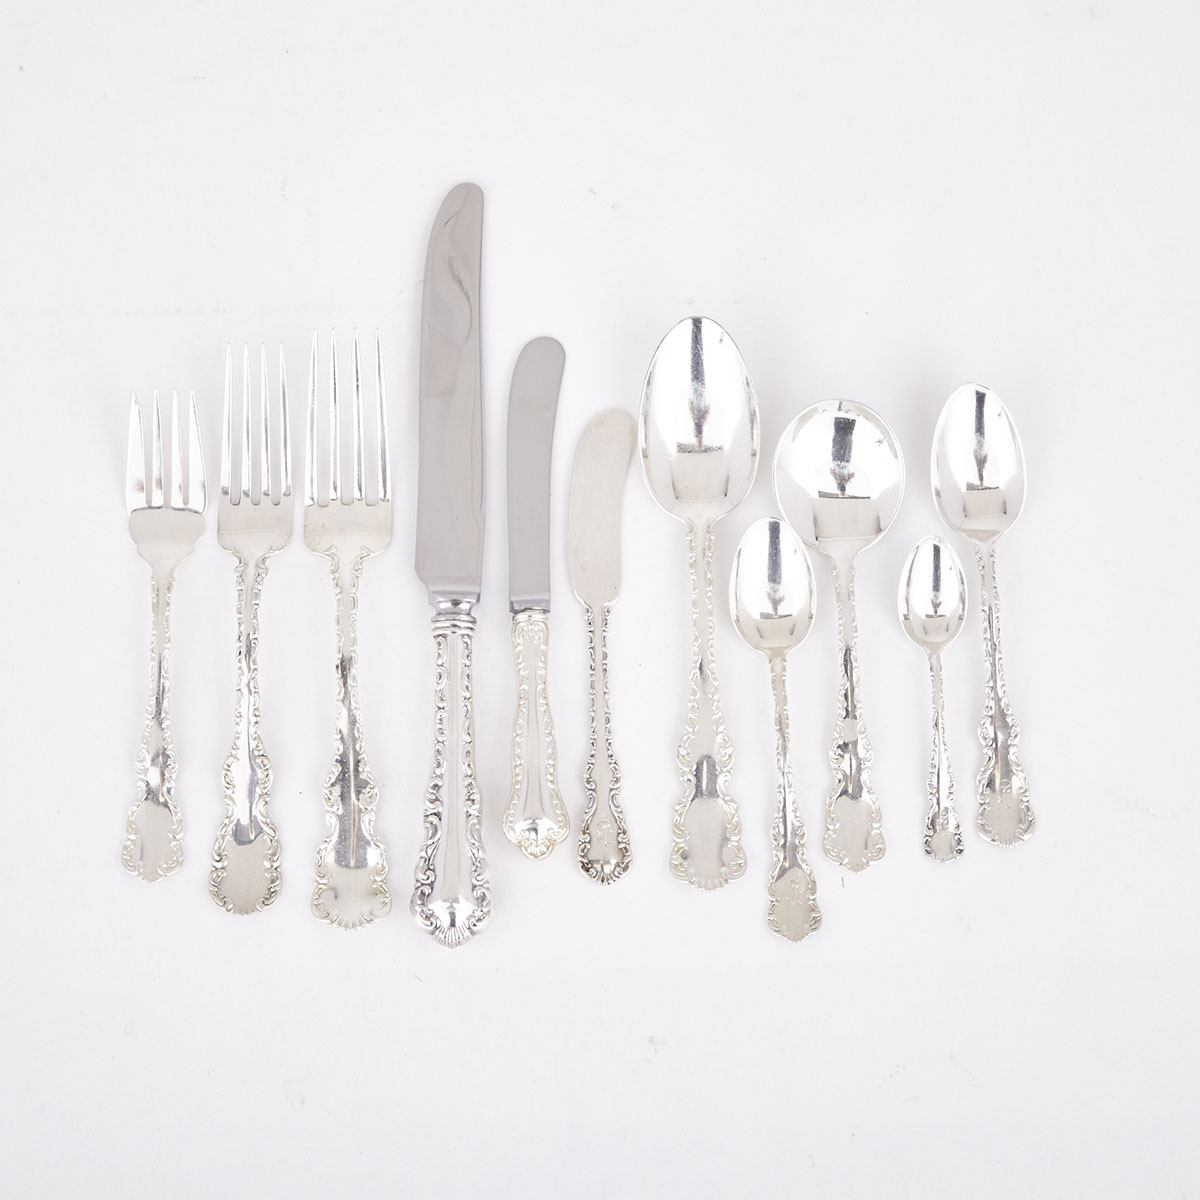 Canadian Silver ‘Louis XV’ Pattern Assembled Flatware, Henry Birks & Sons, Montreal, Que., J.E. Ellis & Co. and Roden Bros., Toronto, Ont., 20th century